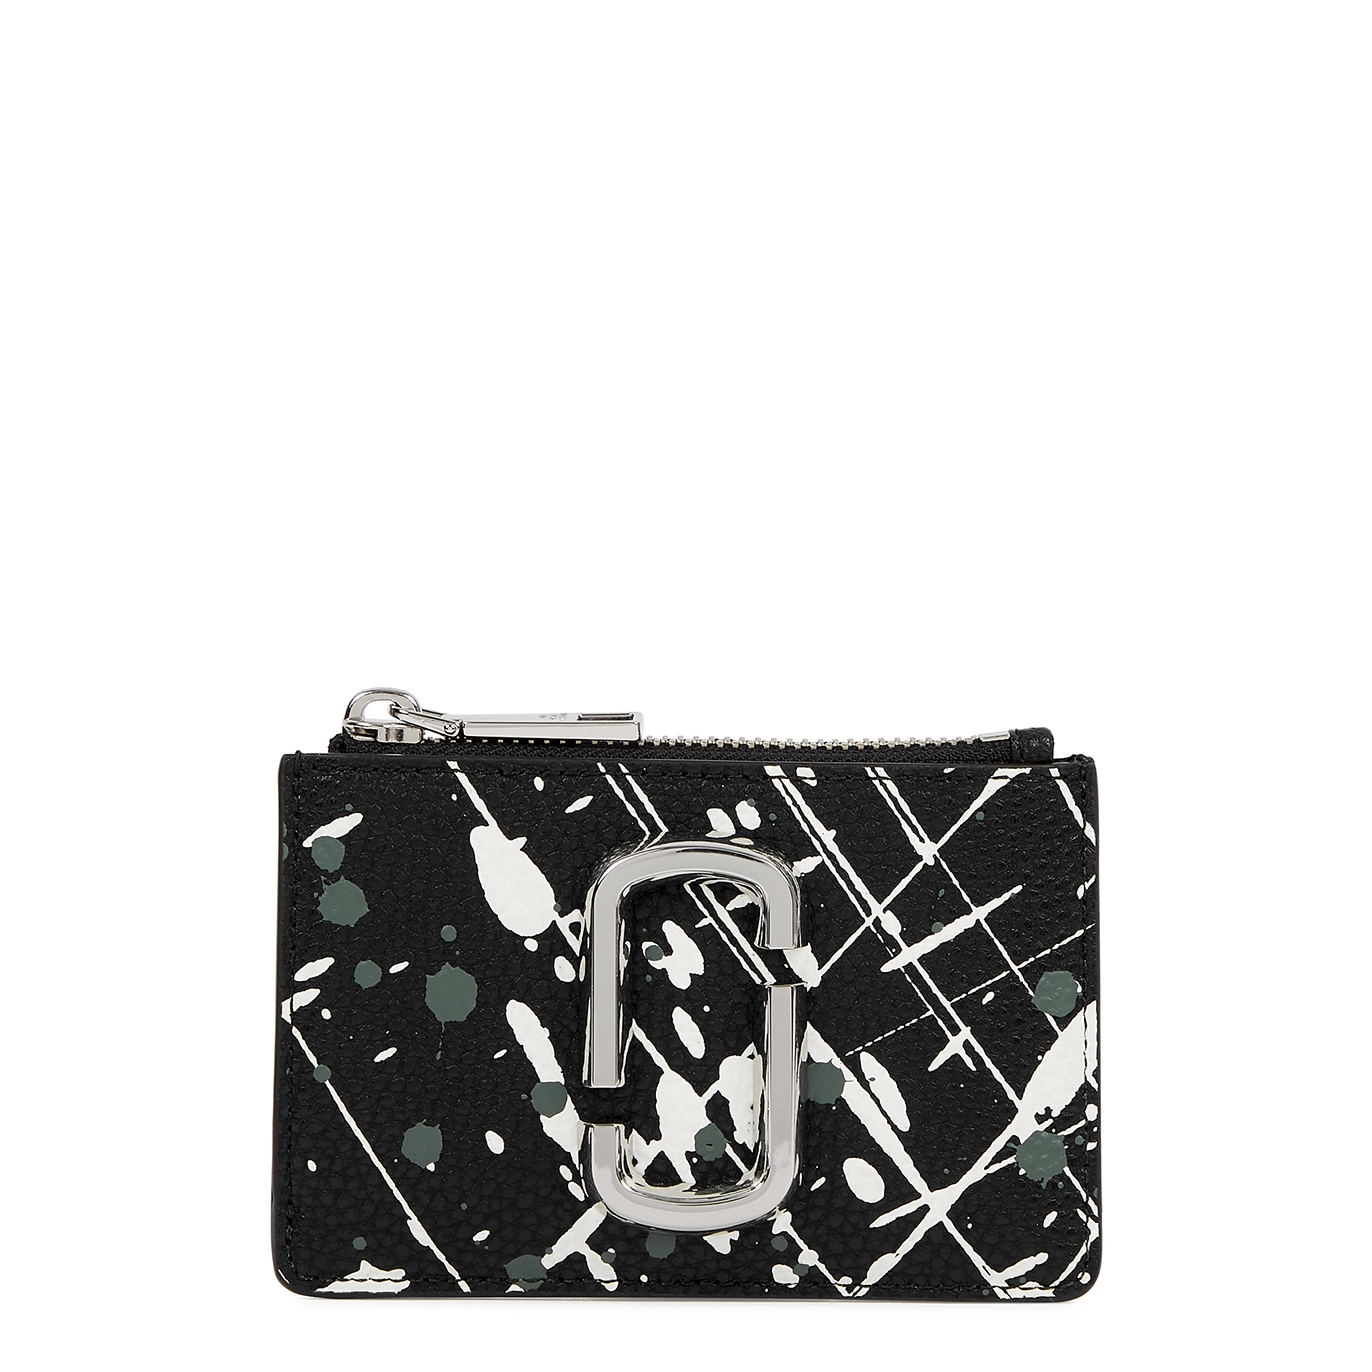 Marc Jacobs The Splatter Printed Leather Wallet - Black - One Size